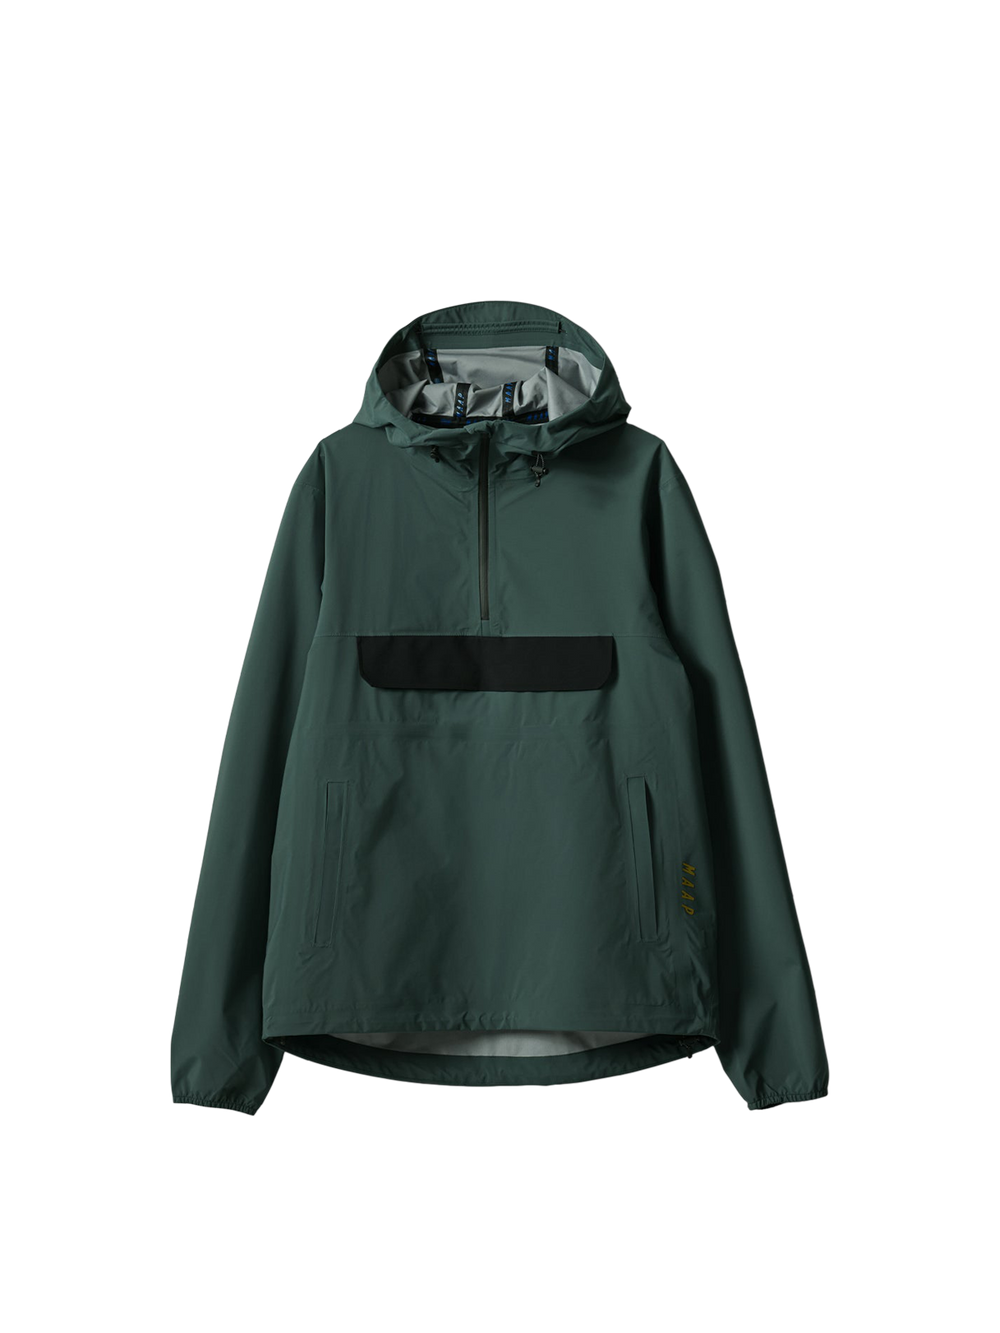 Product Image for Alt_Road Lightweight Anorak